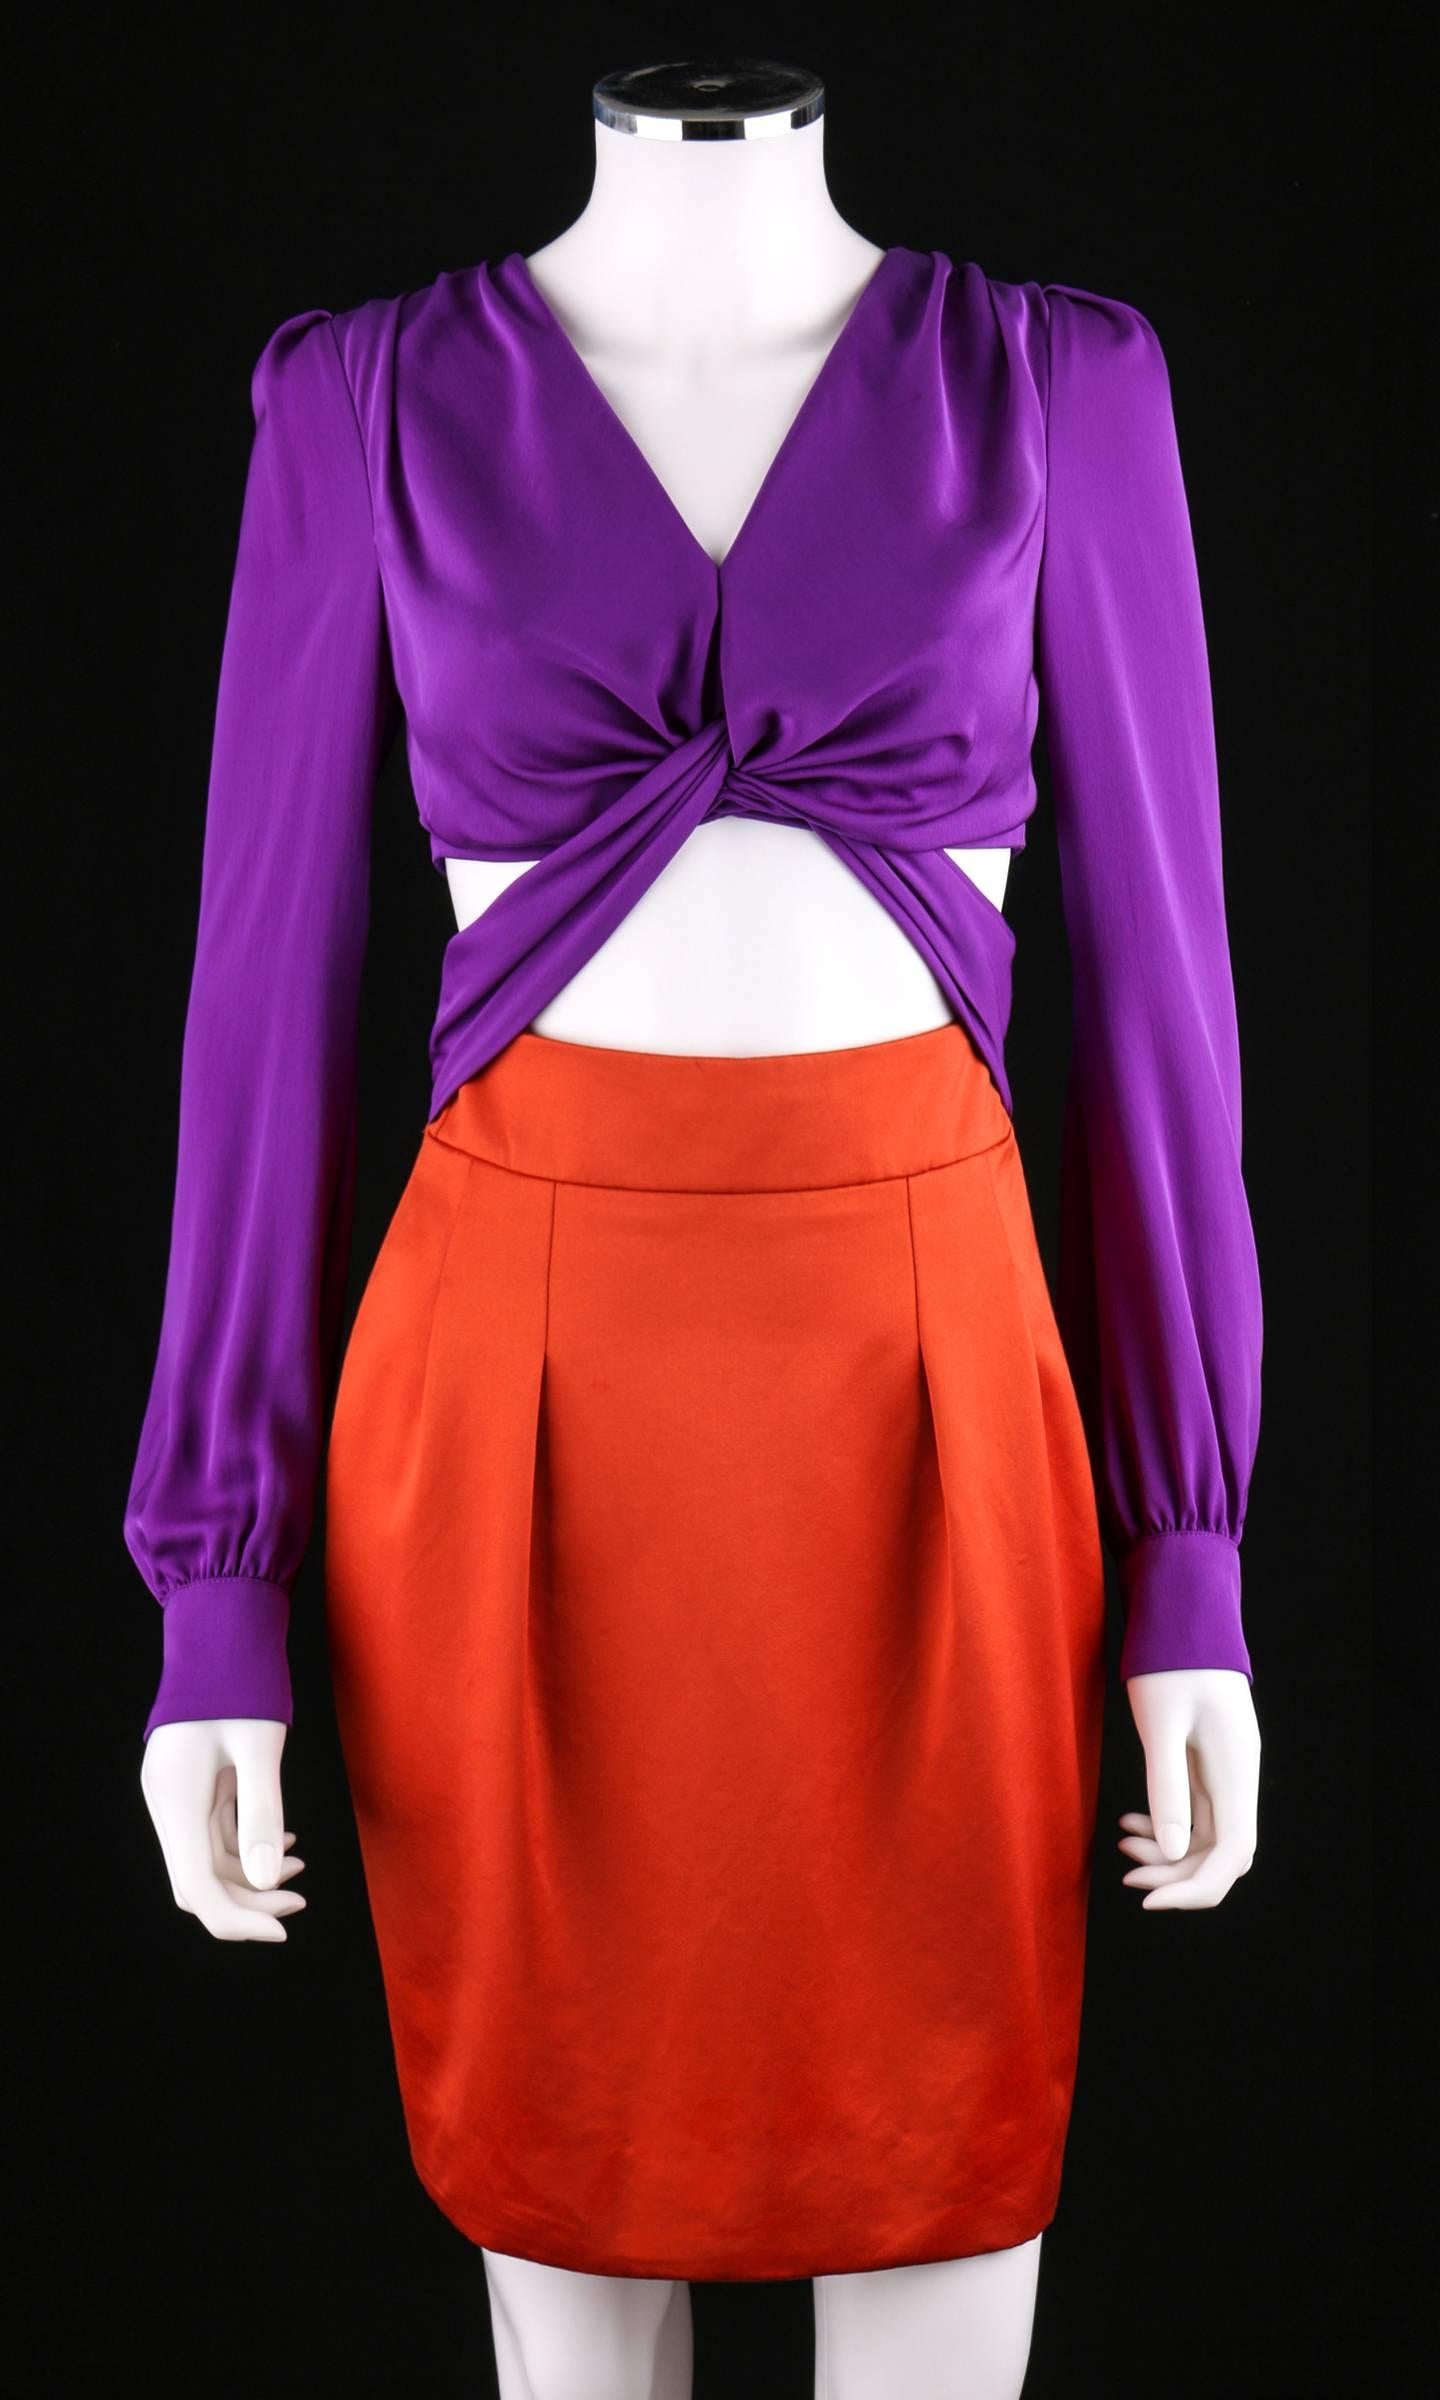 Gucci Spring/Summer 2011 orange / purple color block dress. Cut-out knotted style midriff. Long sleeves button at cuffs. V-neckline. Pleated detail at shoulders. Zips at center back. Worn by numerous celebrities including Jennifer Lawrence, January